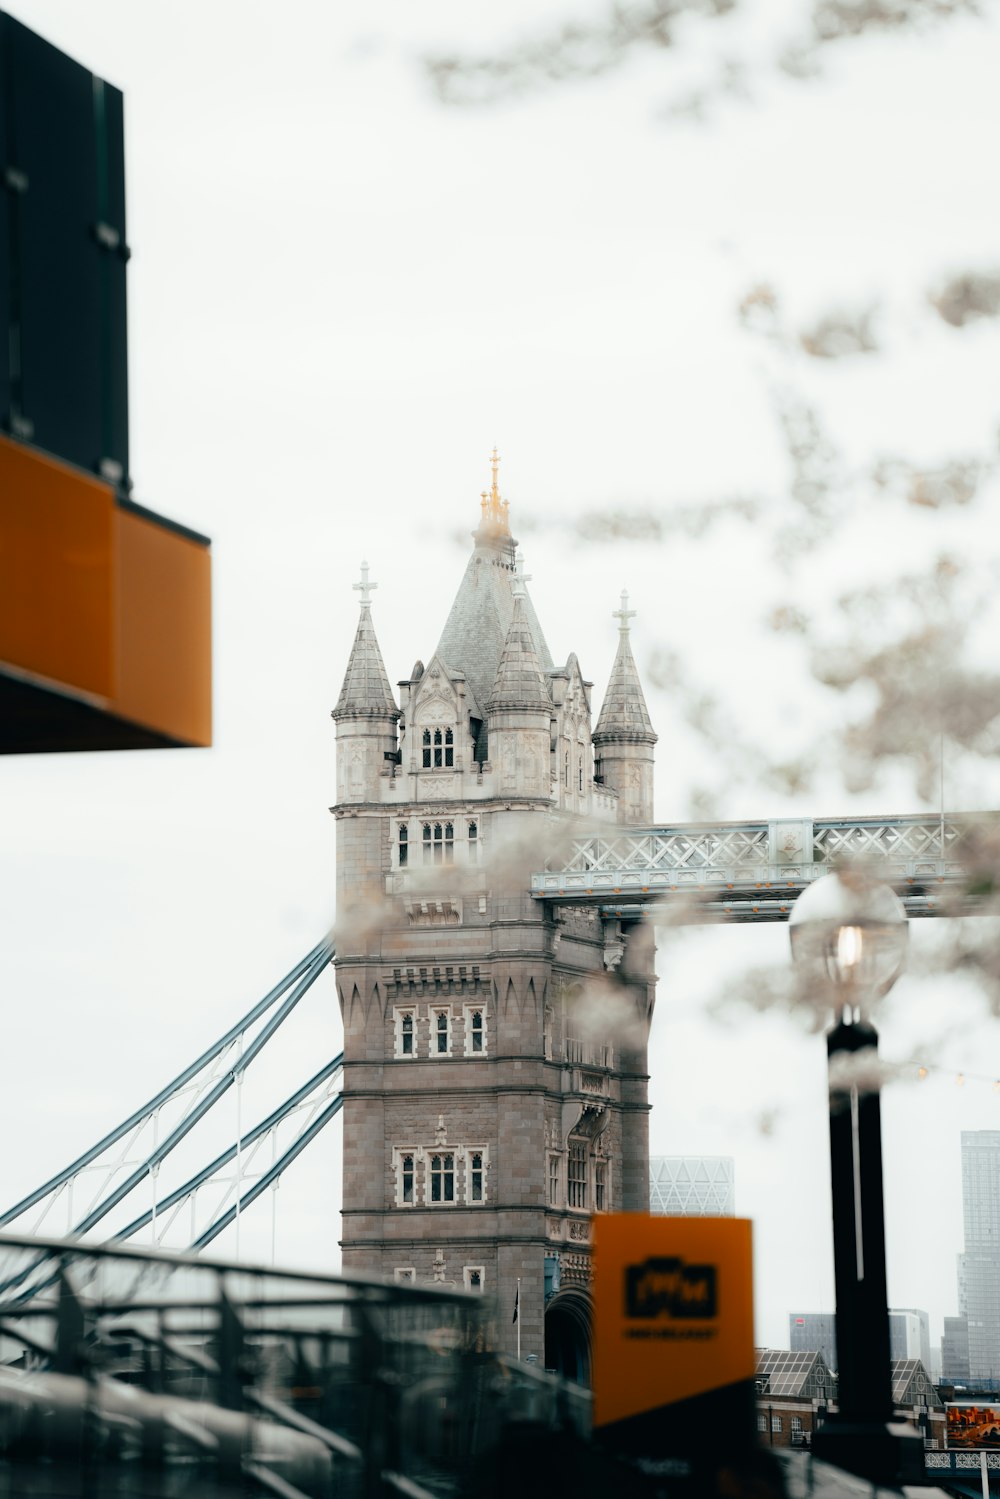 a view of the tower bridge through a window